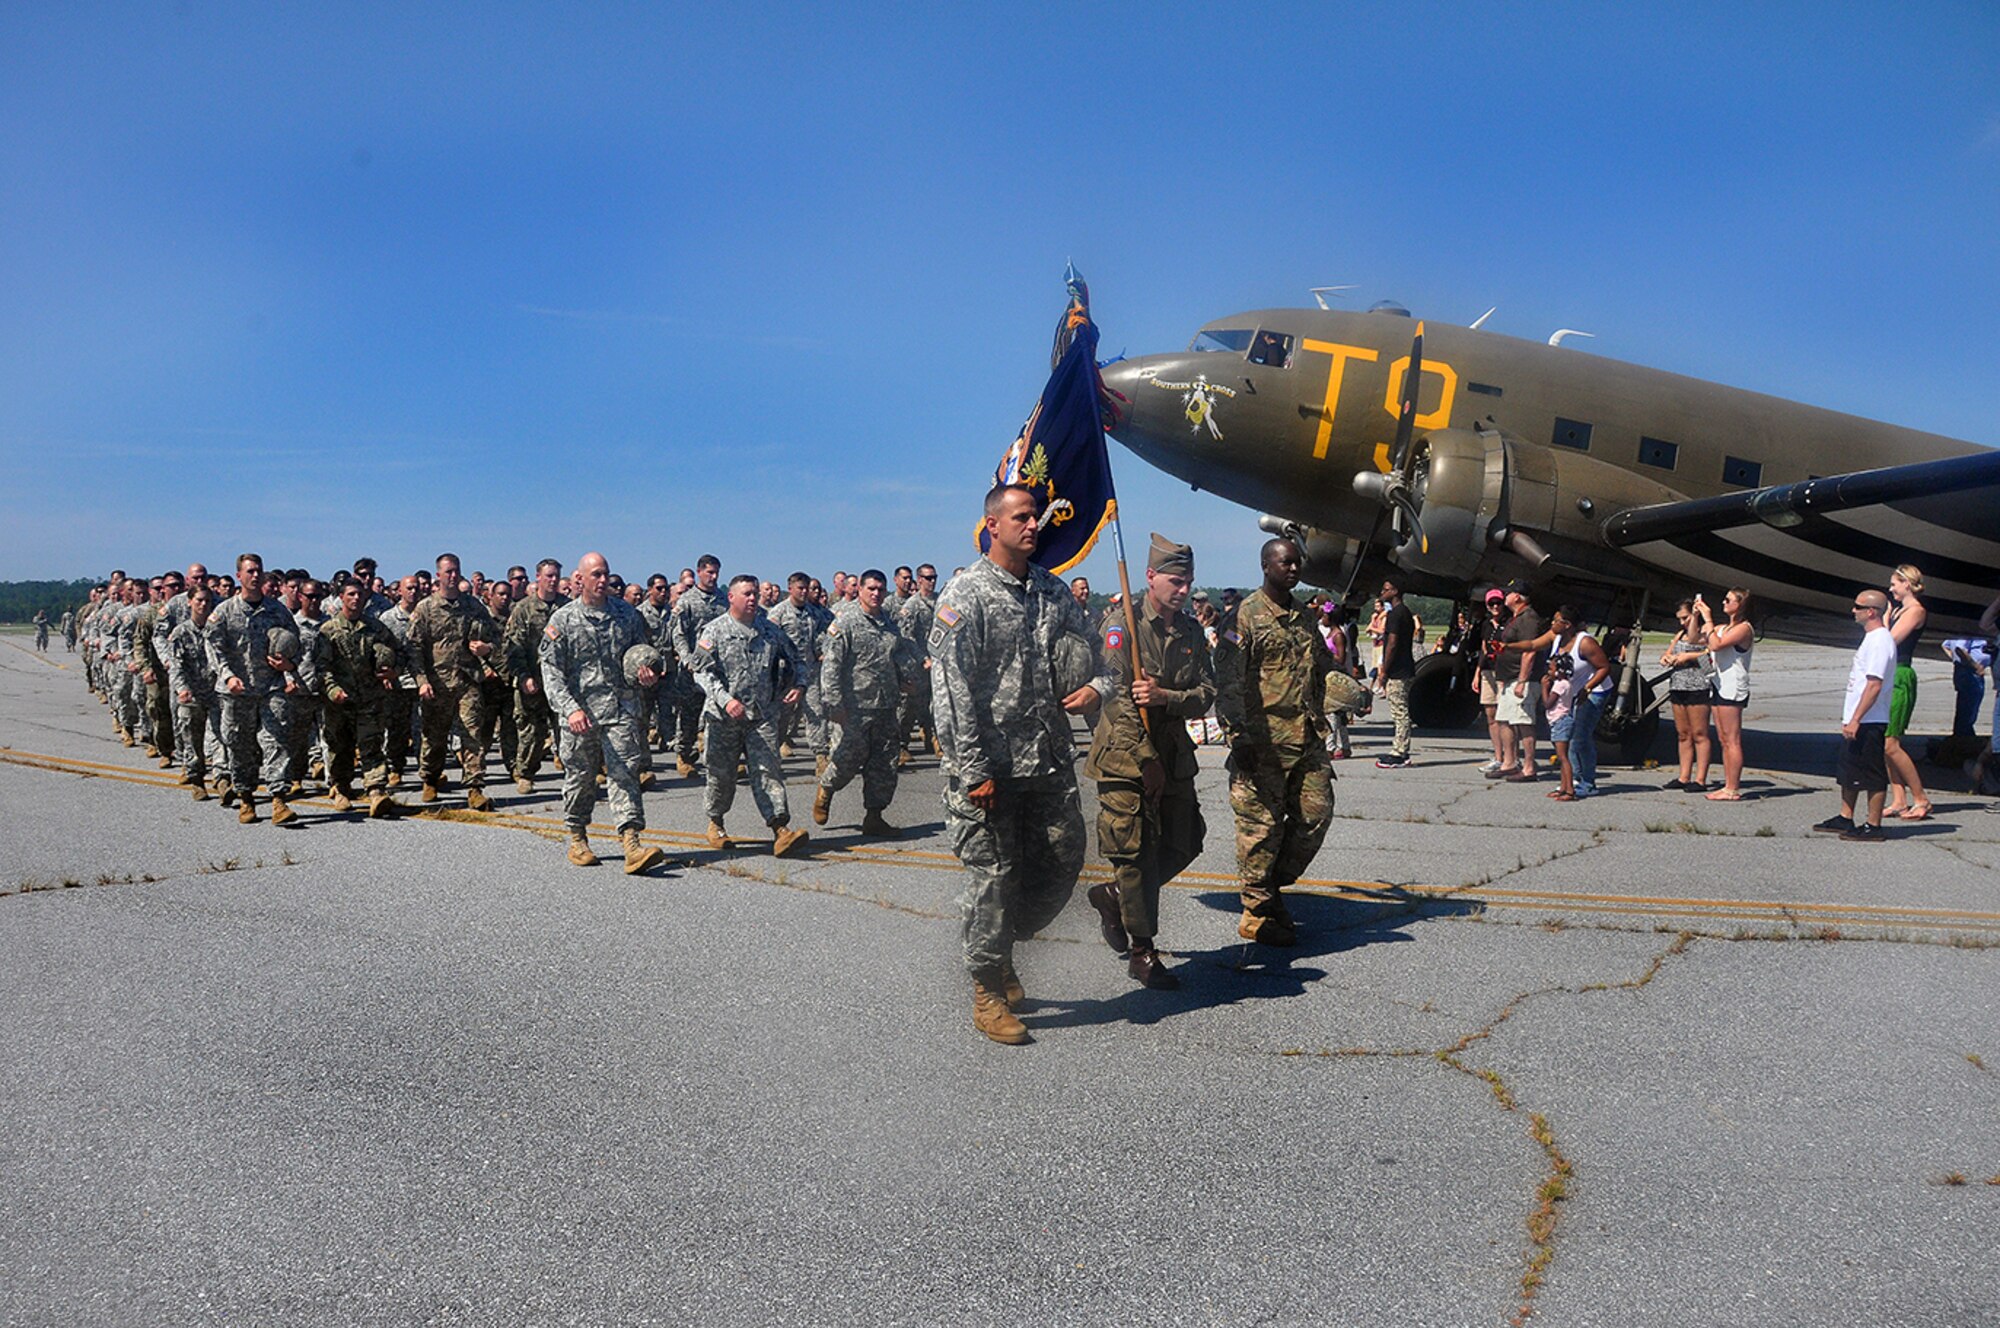 Led by Lt. Col. Korey Brown, paratroopers taking part in the airborne anniversary celebrations march from the drop zone past a vintage C-47 Skytrain as visitors look on. (Photo by Gene H. Hughes)